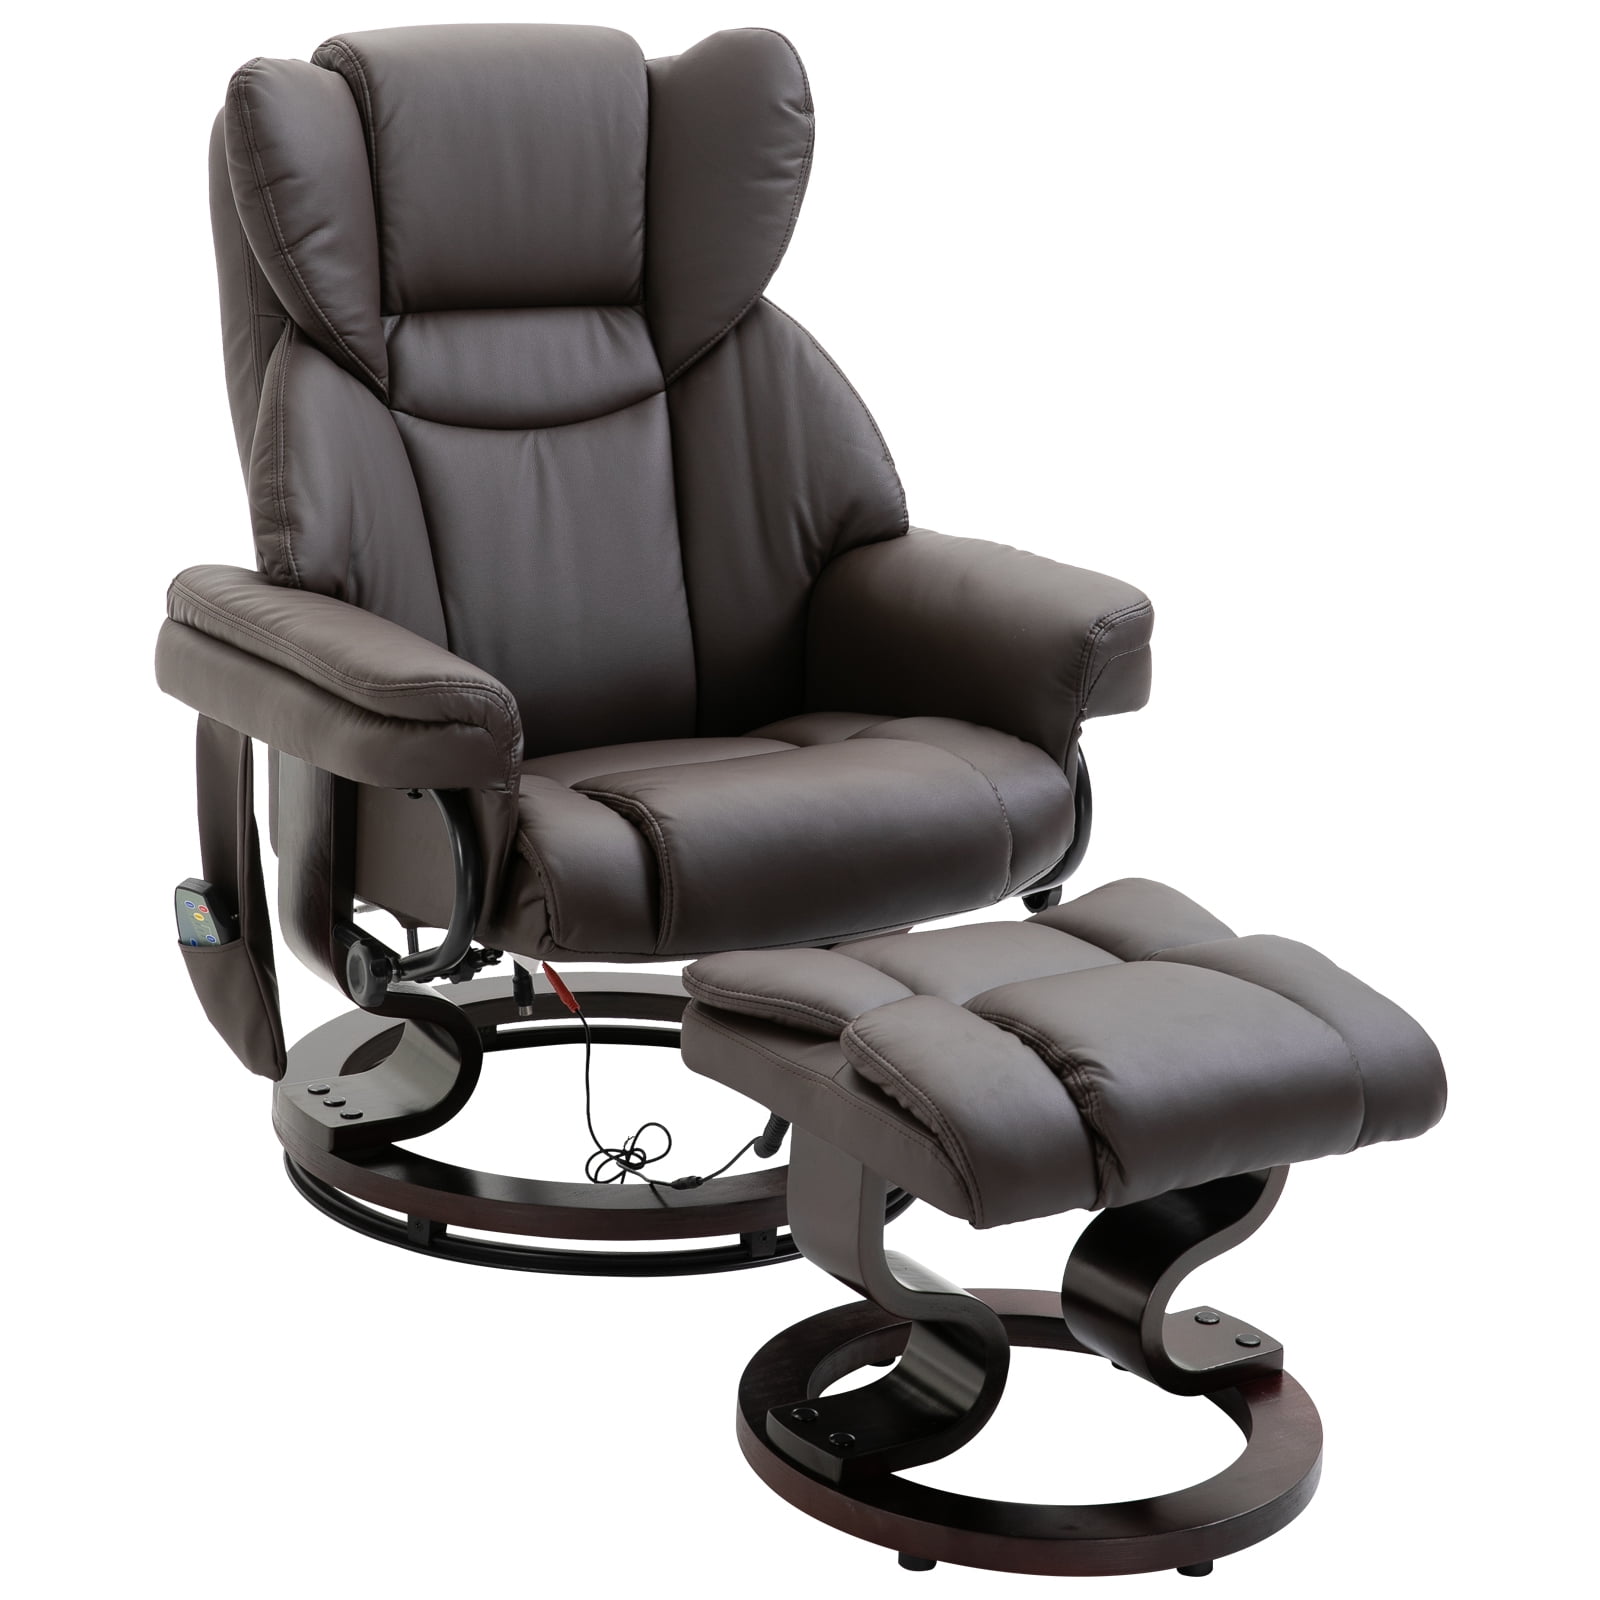 windaze Massage Leather Recliner Ottoman Living Room Chair Set 8-Vibration Motors & Heat with Swiveling Mahogany Wood Base and Cup Holder Black